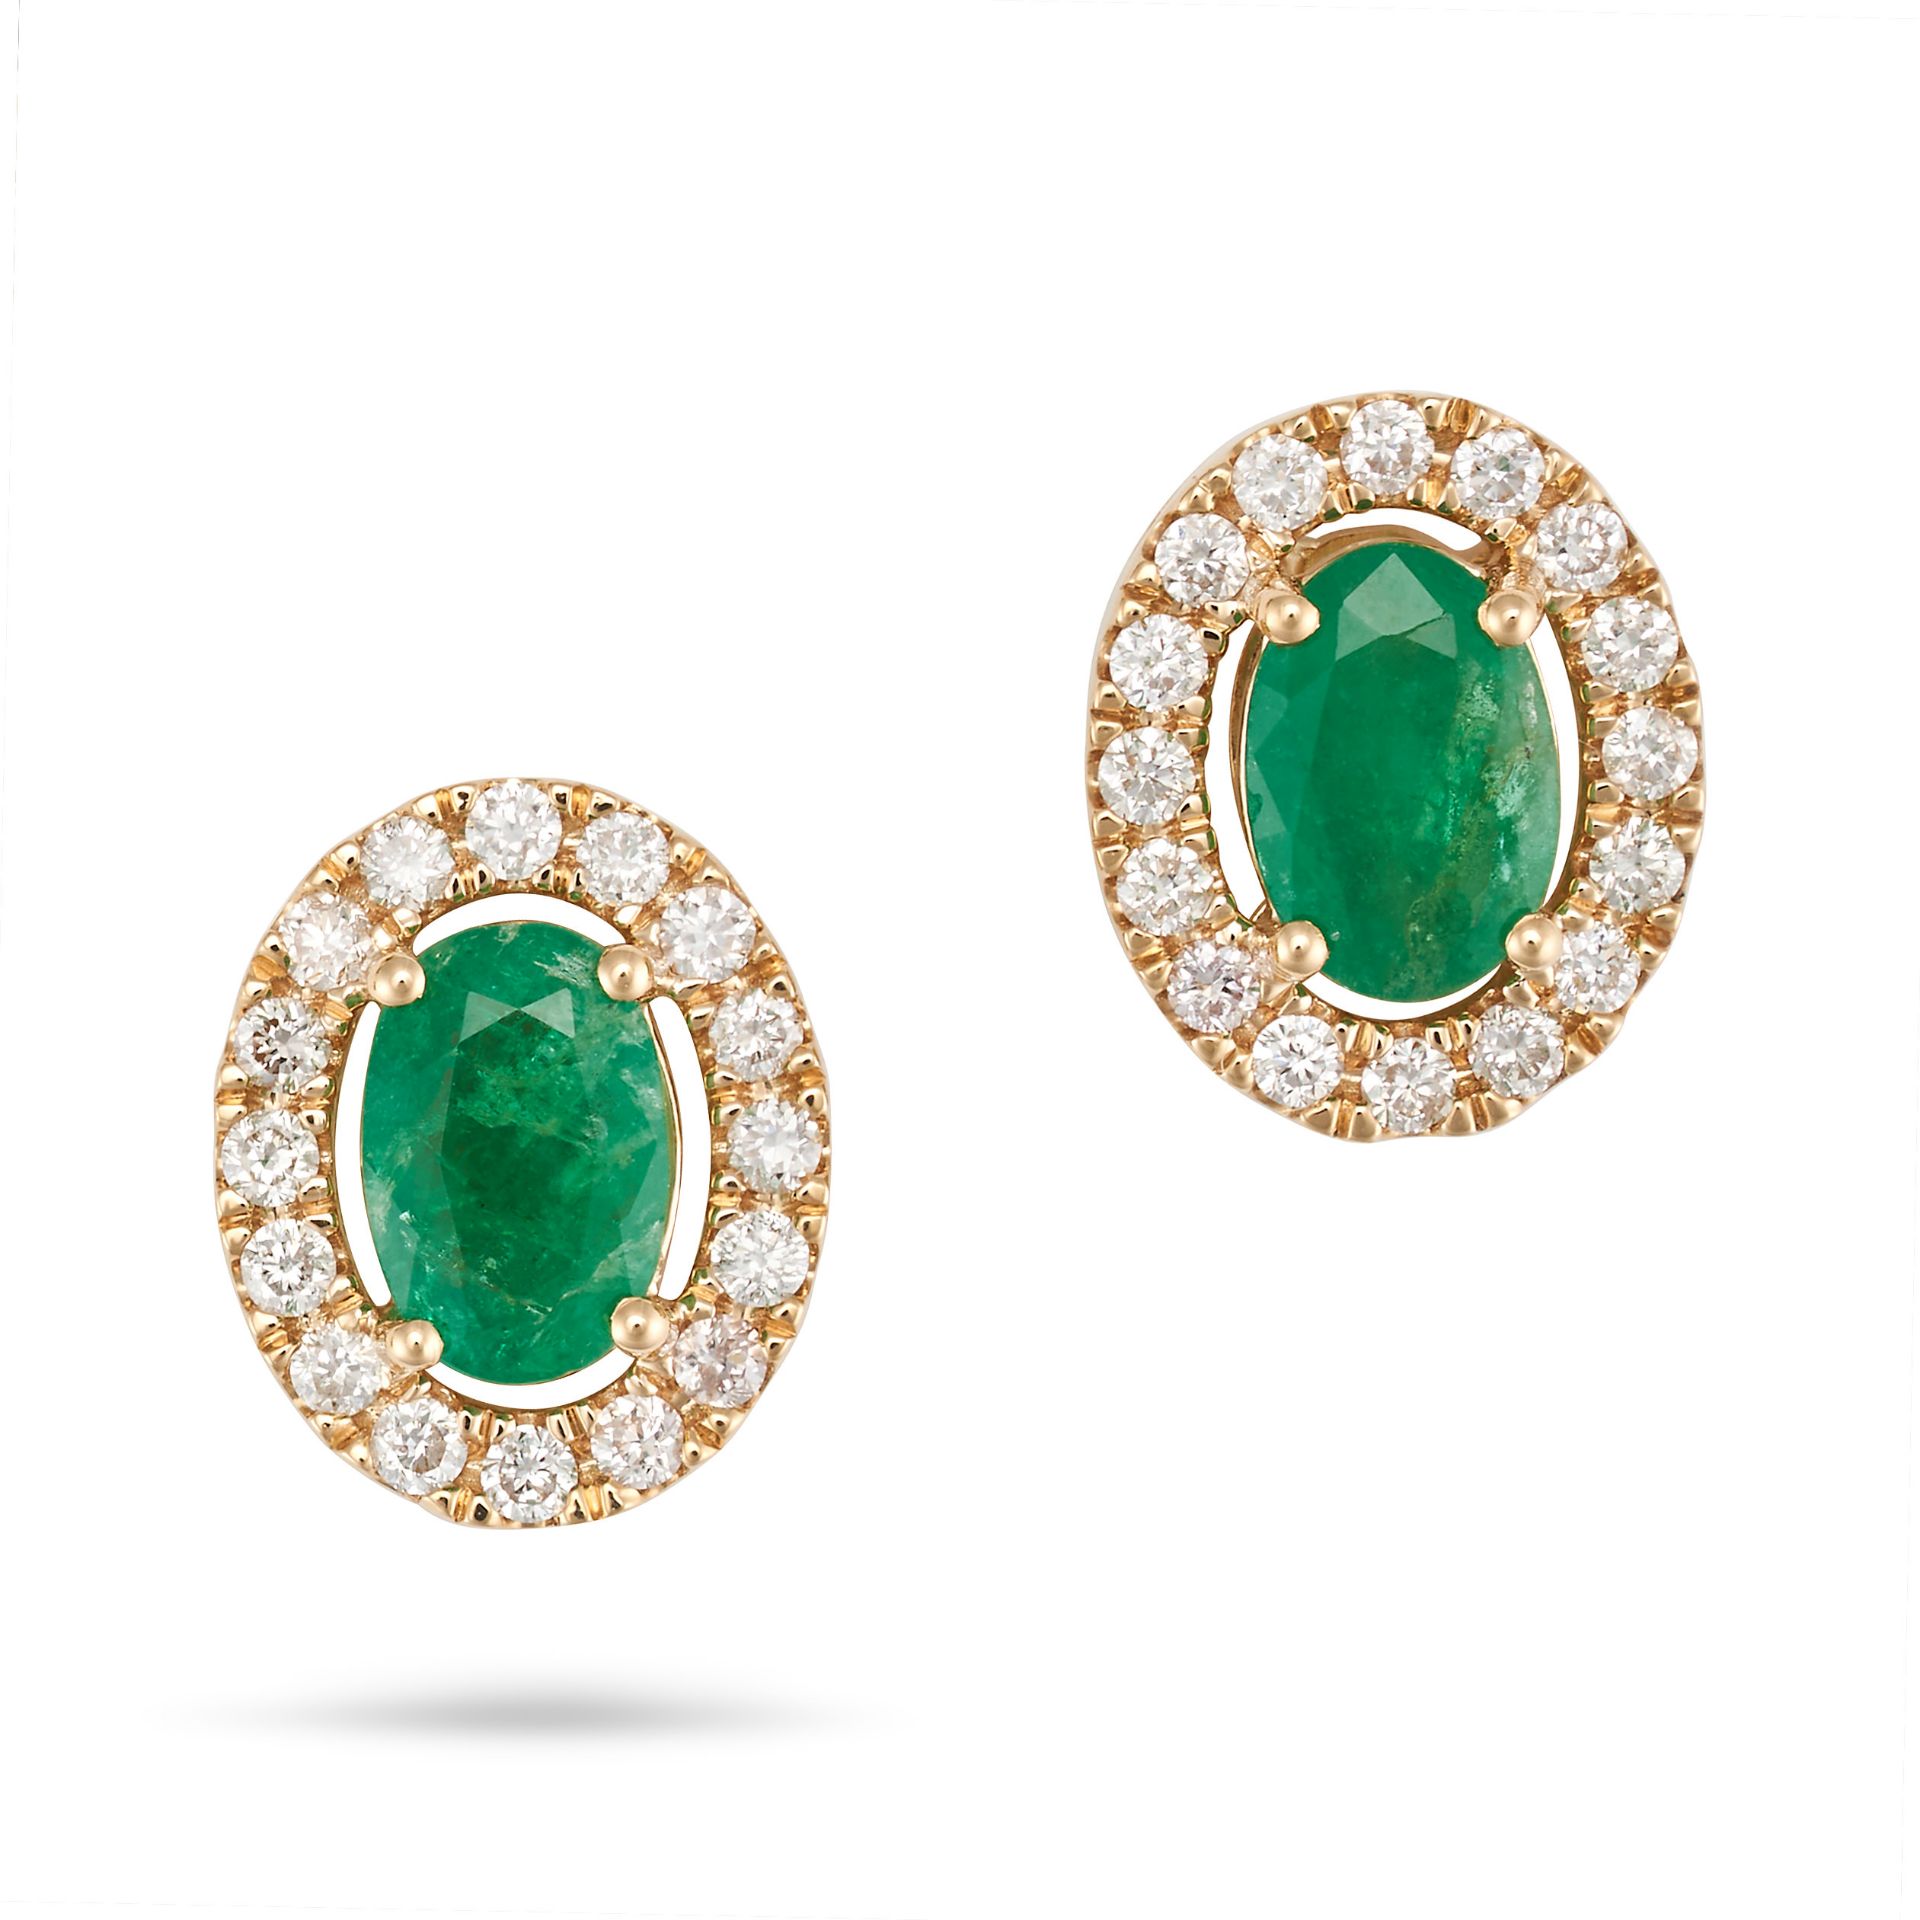 A PAIR OF EMERALD AND DIAMOND EARRINGS in 14ct yellow gold, each set with a central oval cut emer...